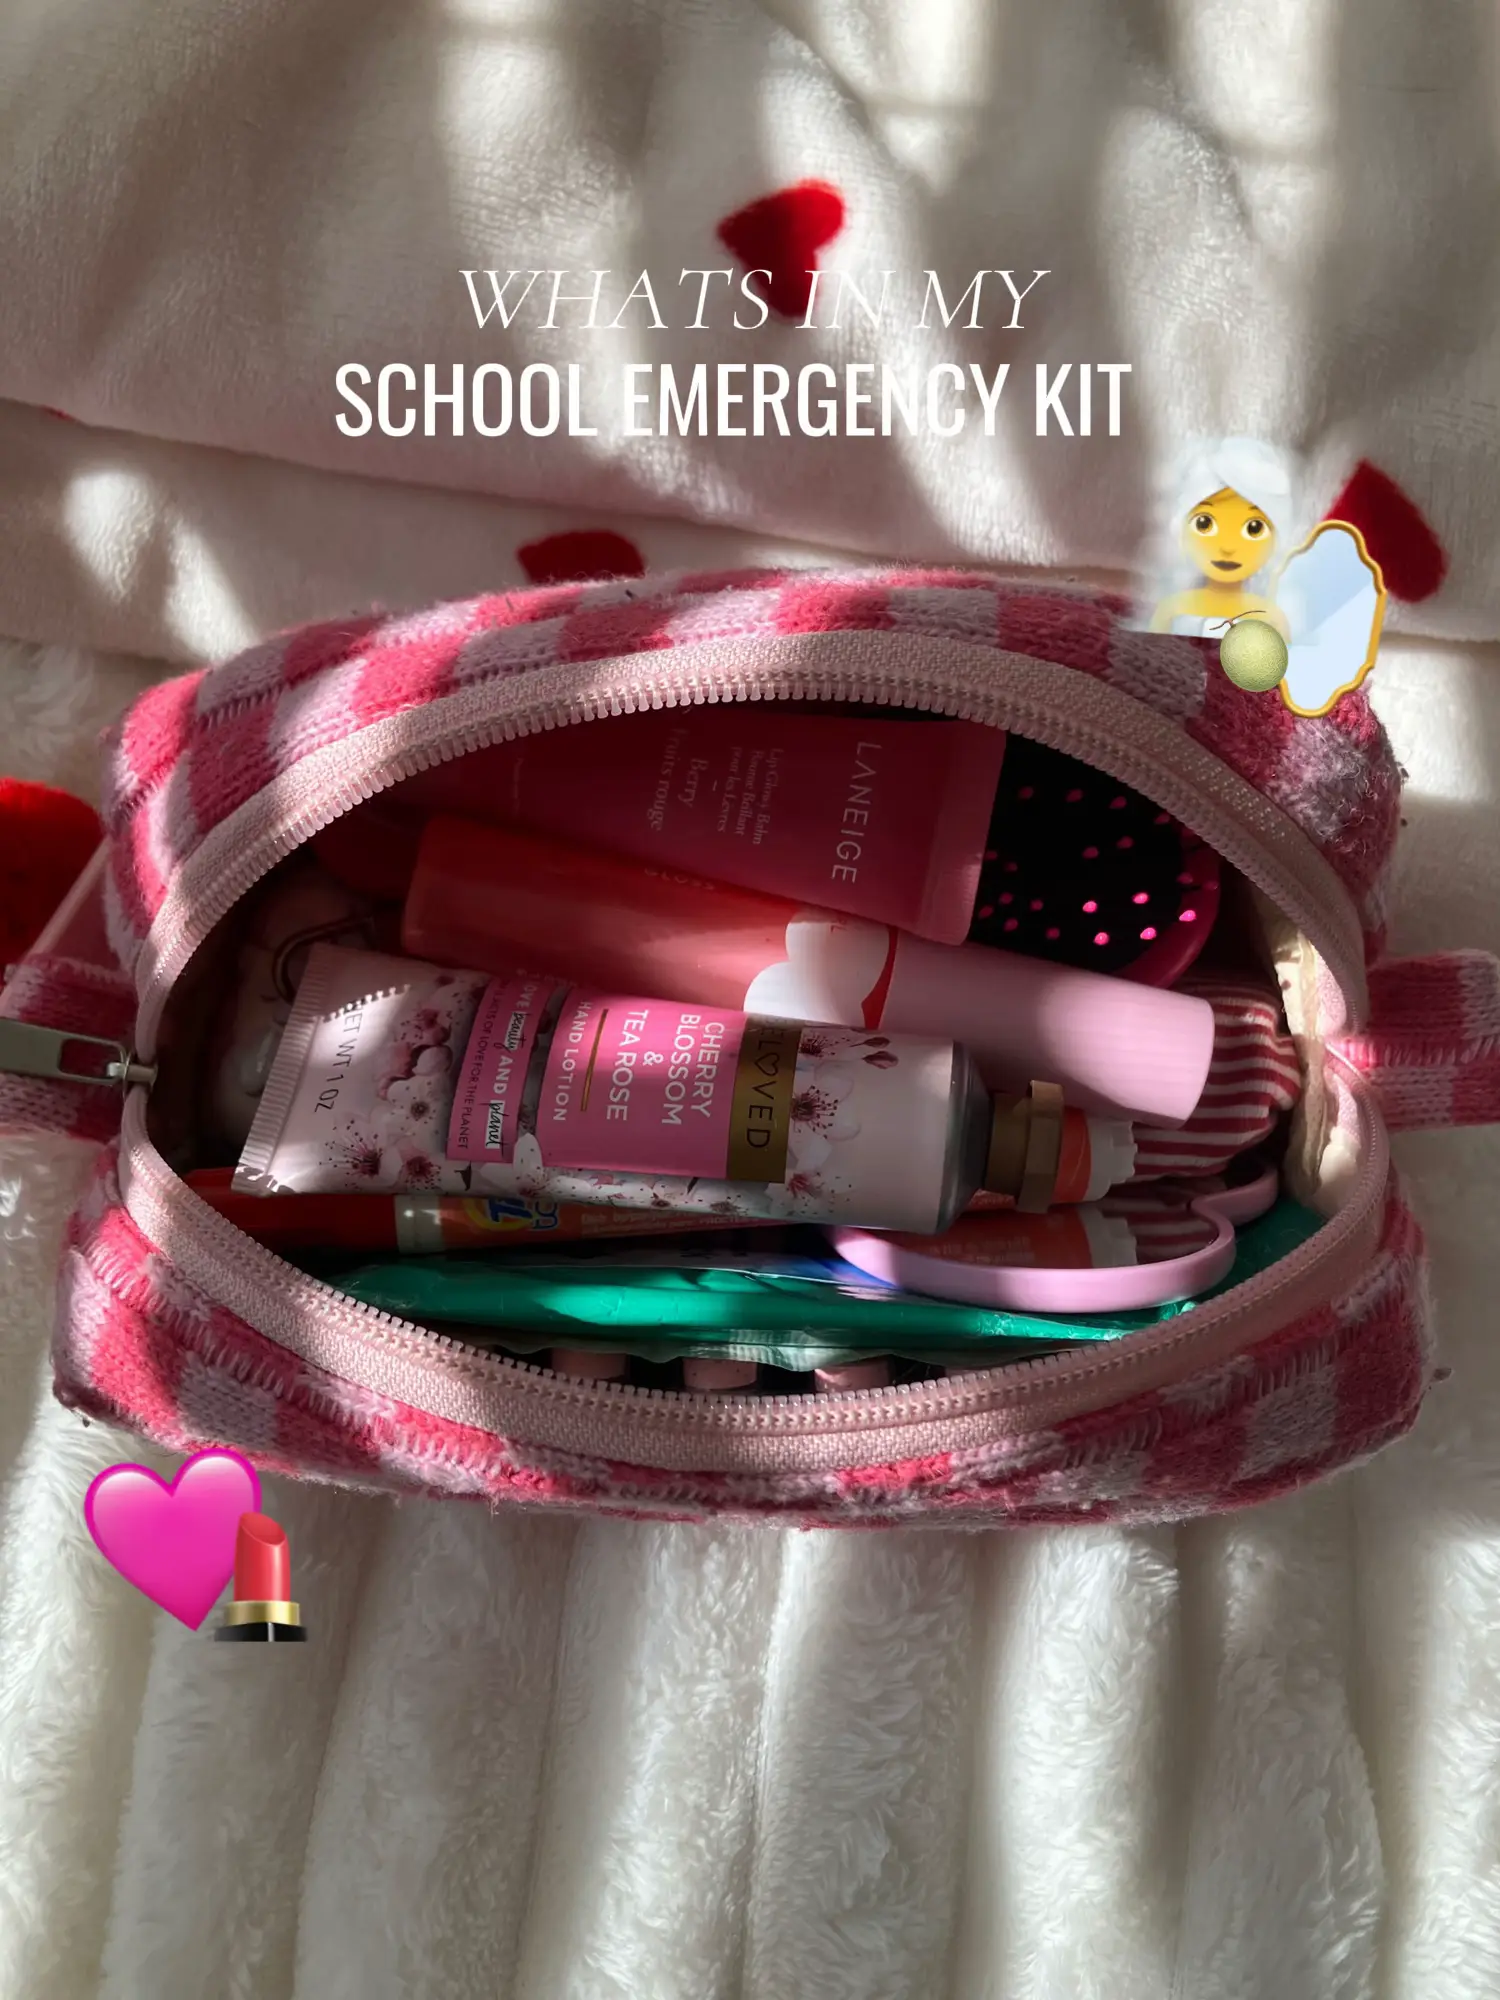 Emergency Period Kits for Teens! Comparing Tampons & Pads, what's